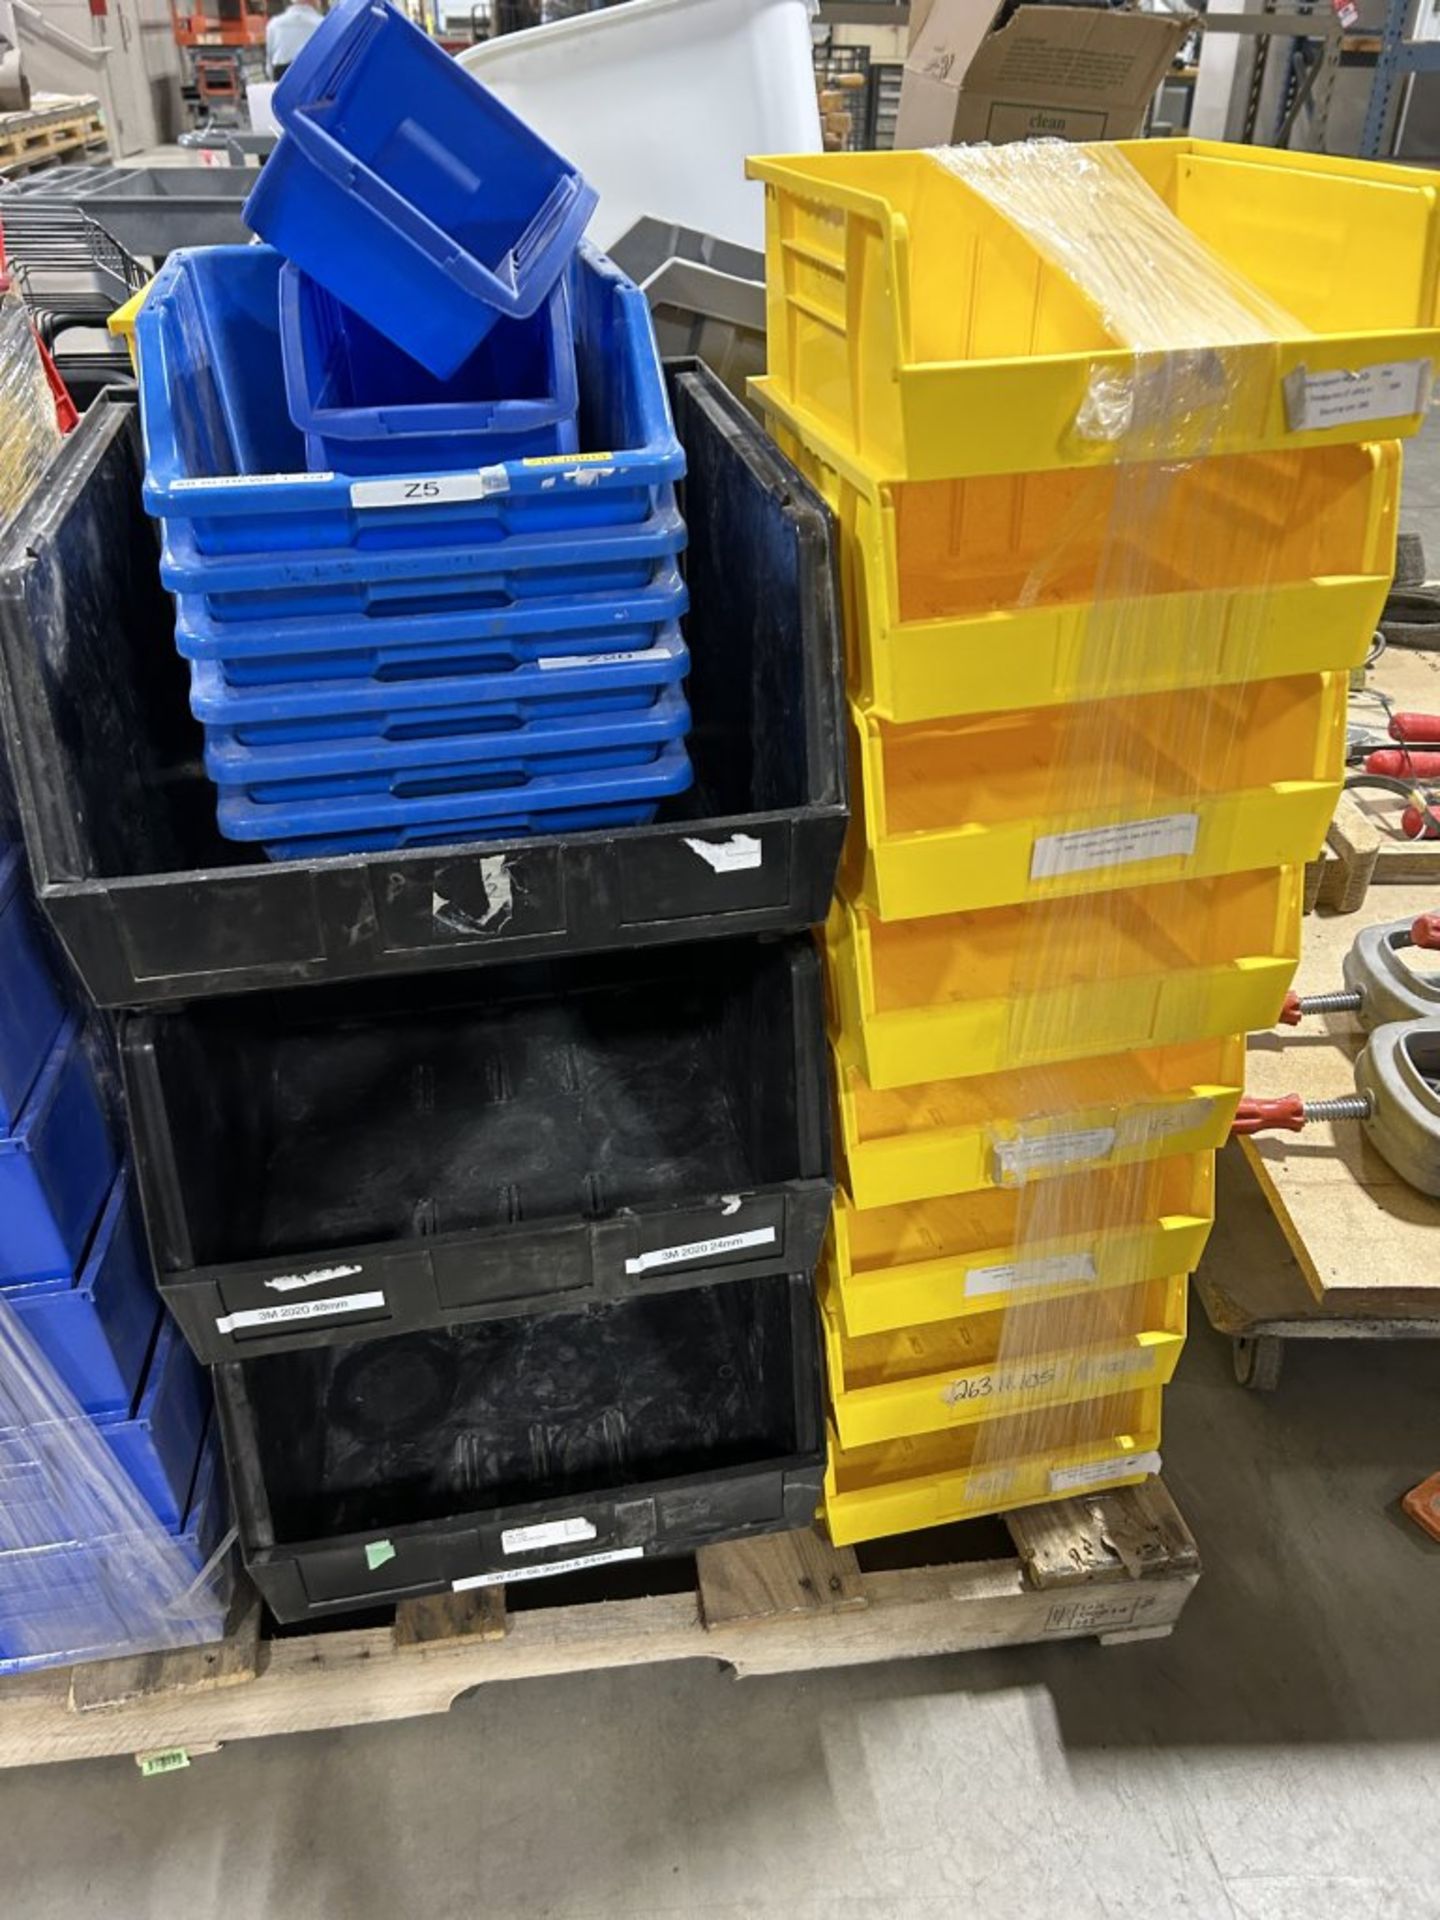 LARGE PALLET FULL OF ASSORTED PLASTIC BINS, STACKABLE, ASSORTED SIZES - Image 5 of 6